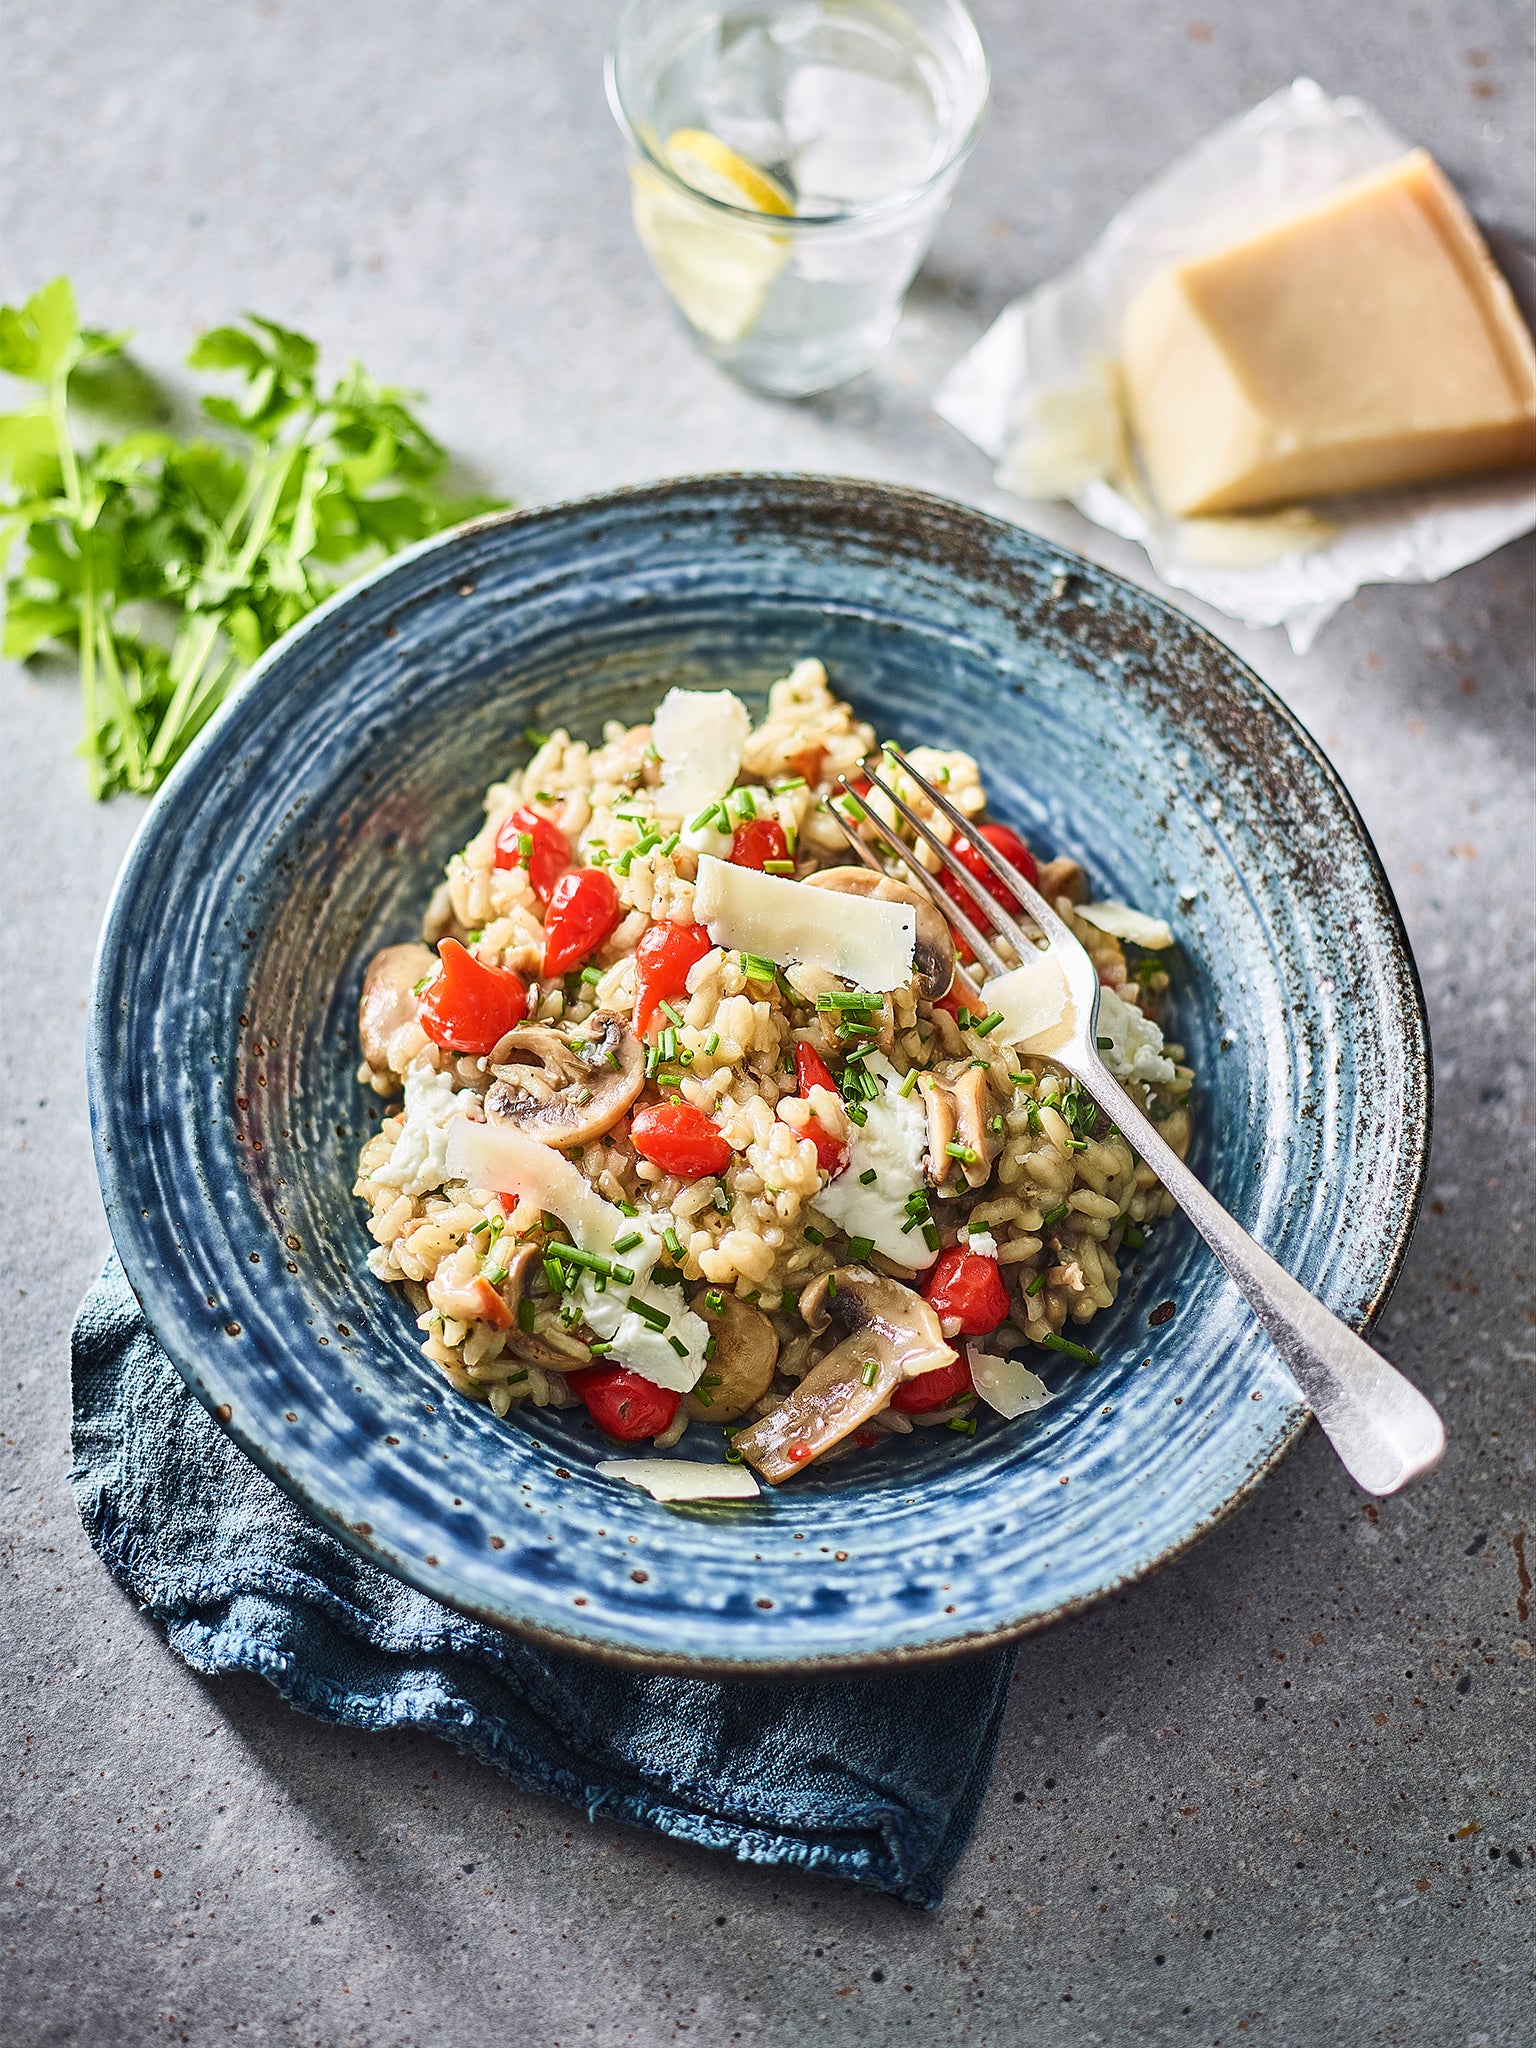 Indulge in a taste of Italy with this creamy risotto, infused with the earthy richness of porcini mushrooms and the tangy goodness of goat’s cheese